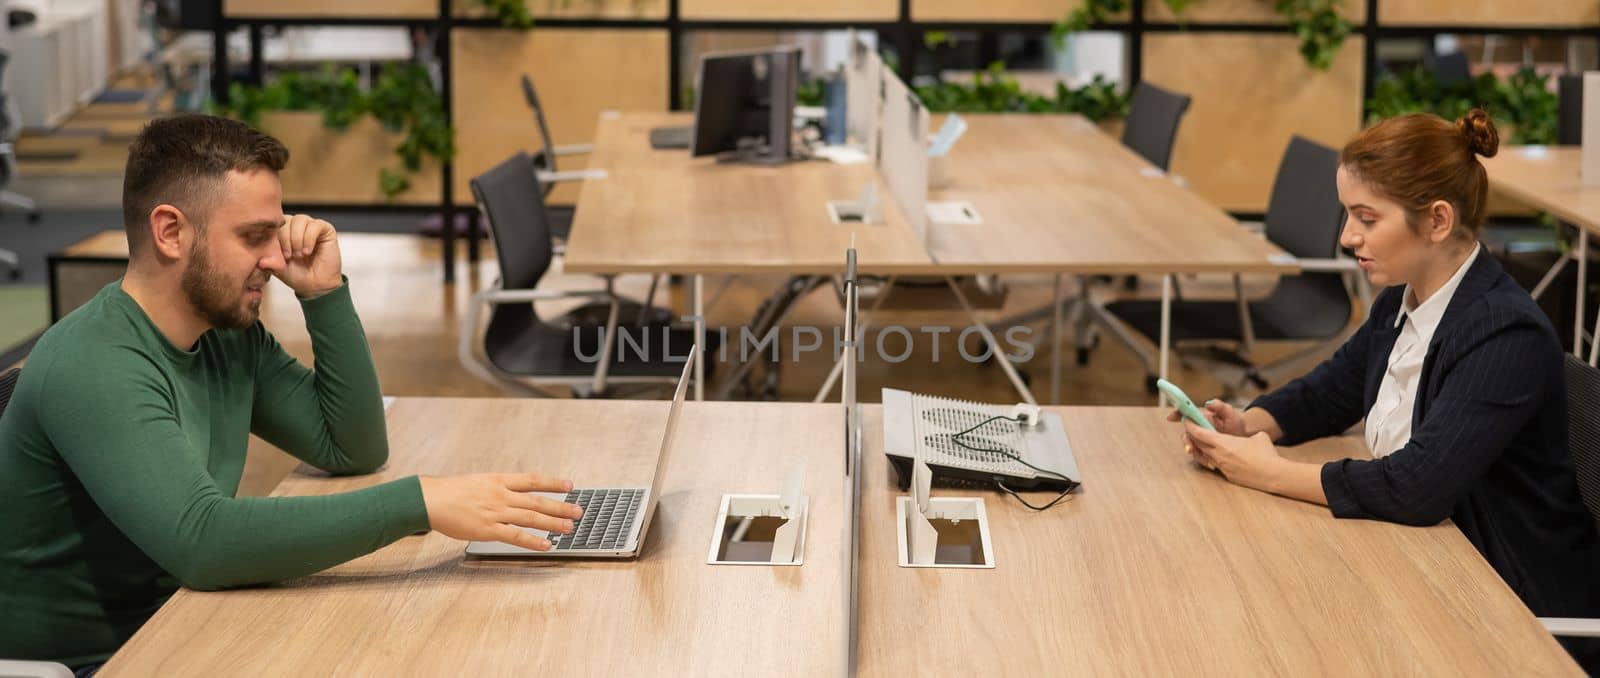 Red-haired caucasian woman uses a smartphone and a bearded man works behind a laptop in an open space office